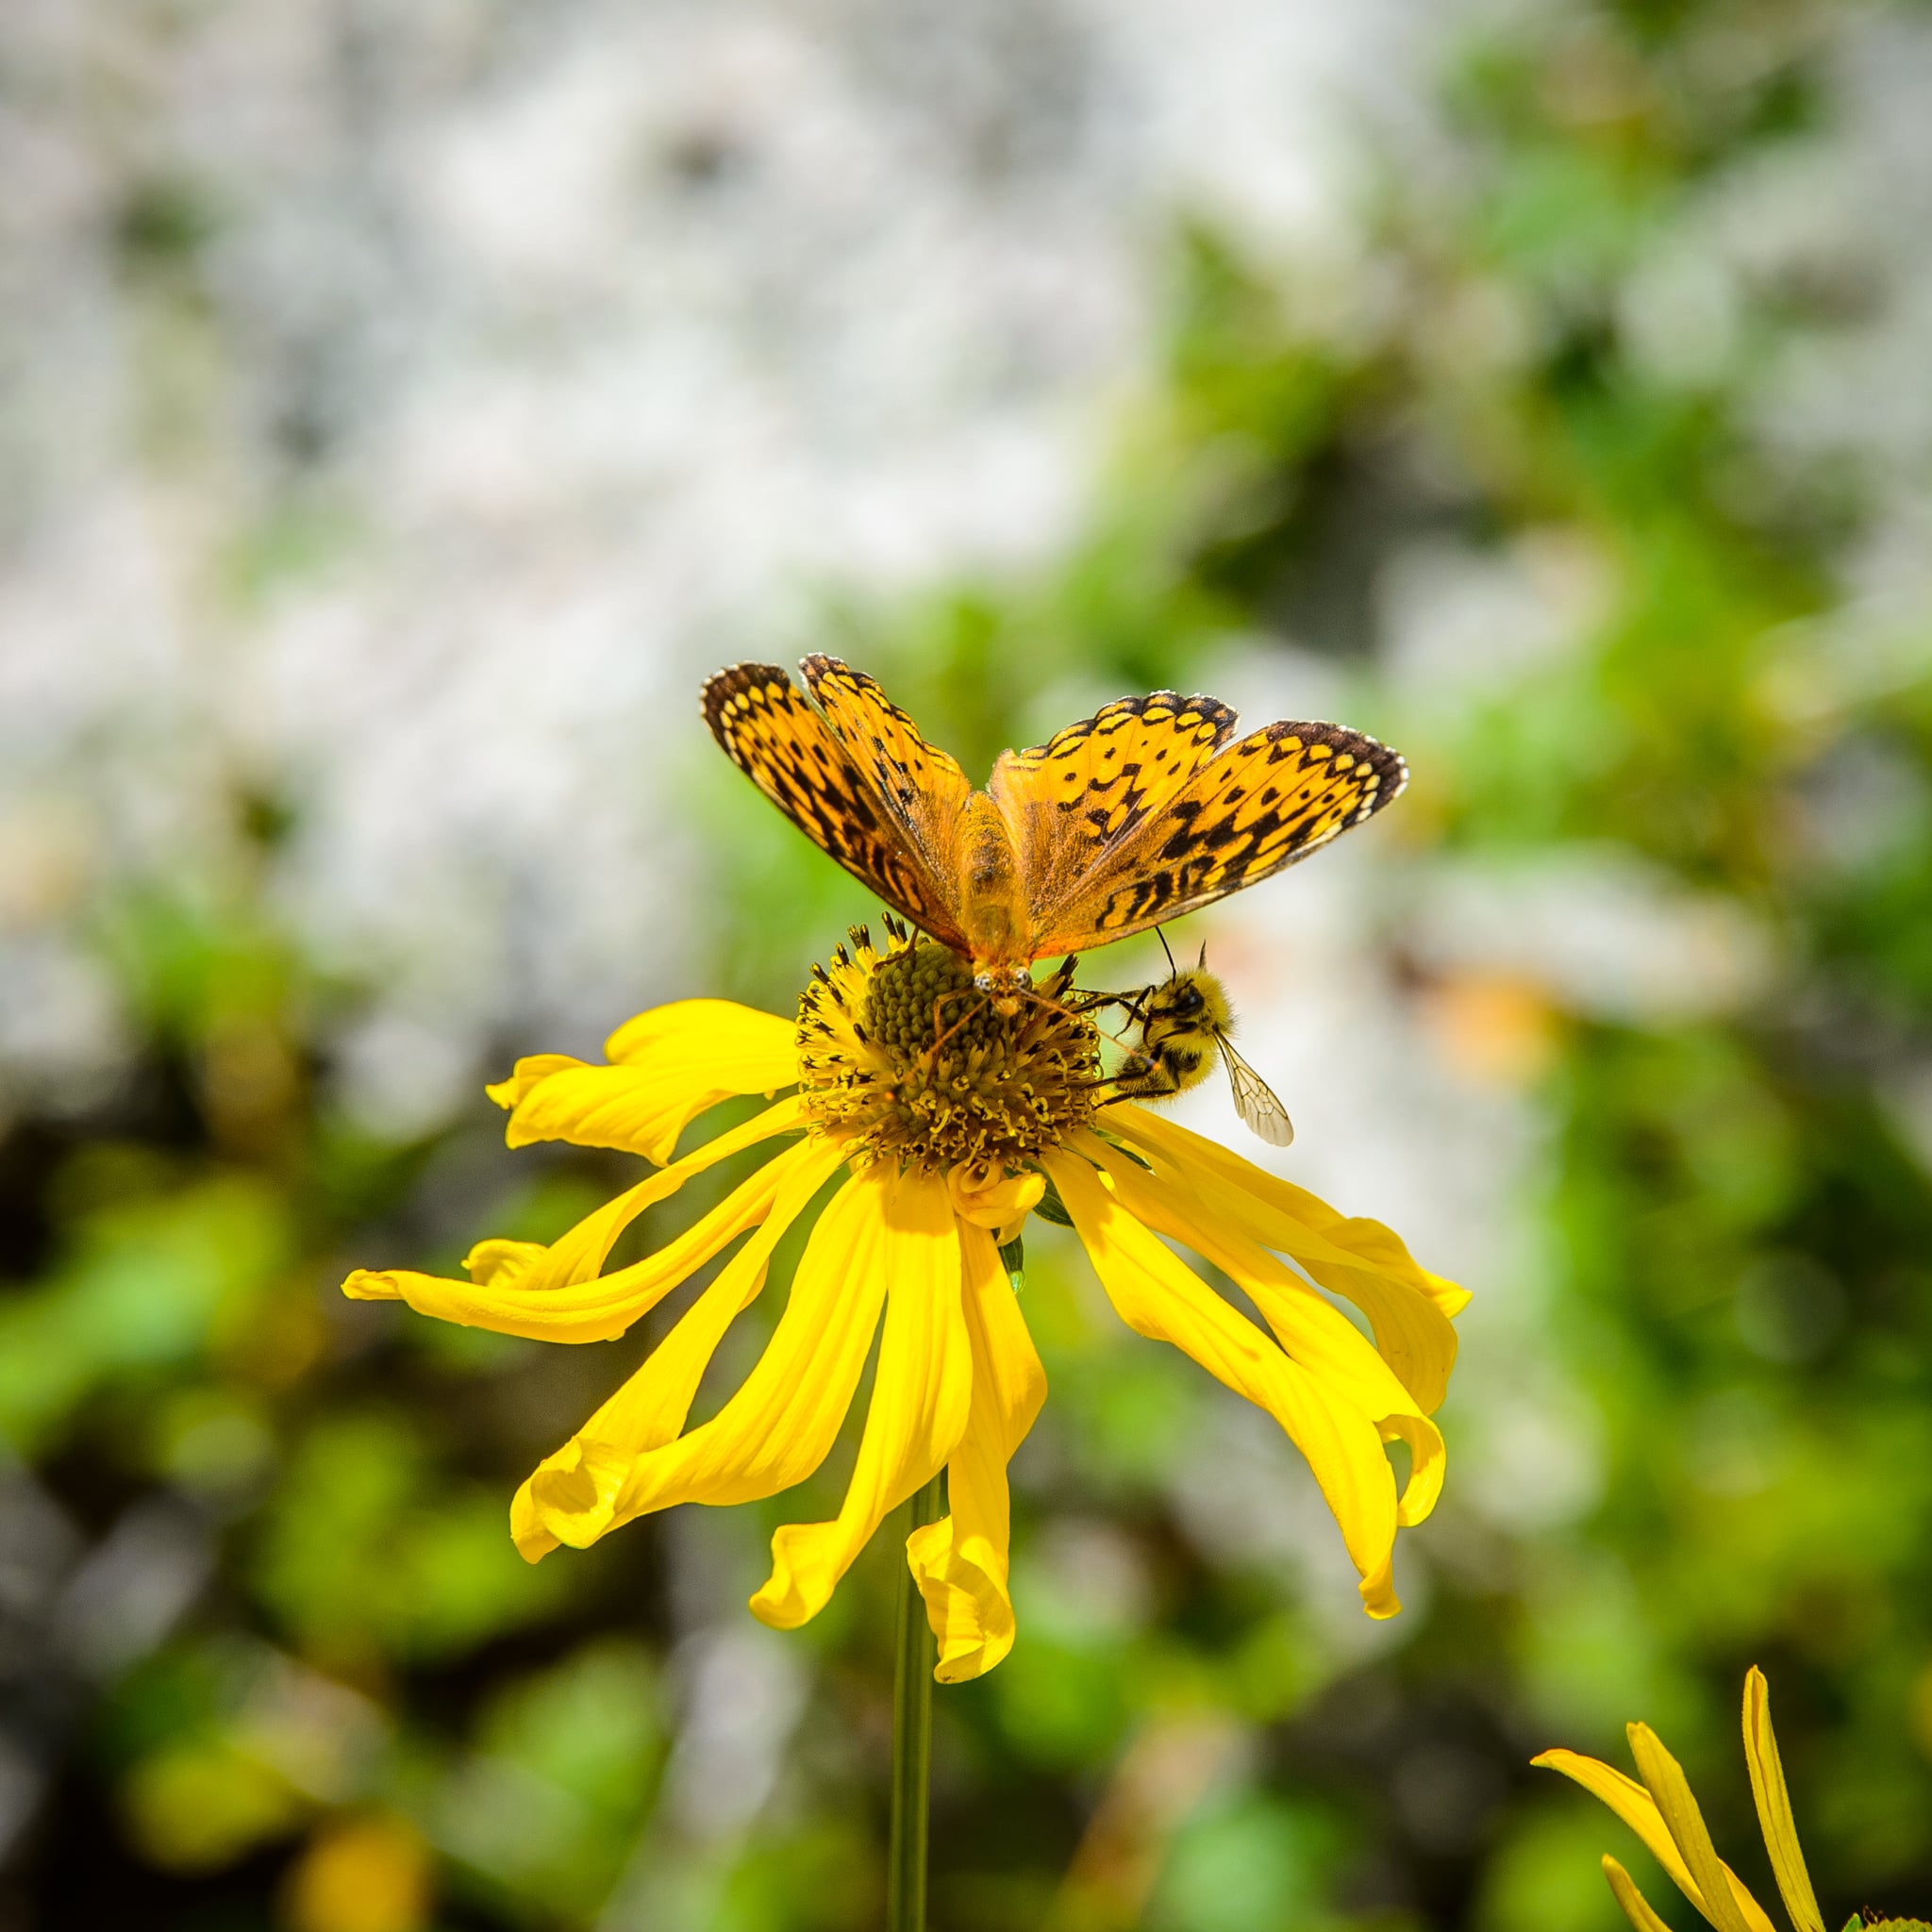 A Callippe Fritillary butterfly shares a perch on an Orange Sneezeweed with a bumblebee along Old Lime Creek Road between Silverton and Durango, Colorado. San Juan Mountain Fauna.